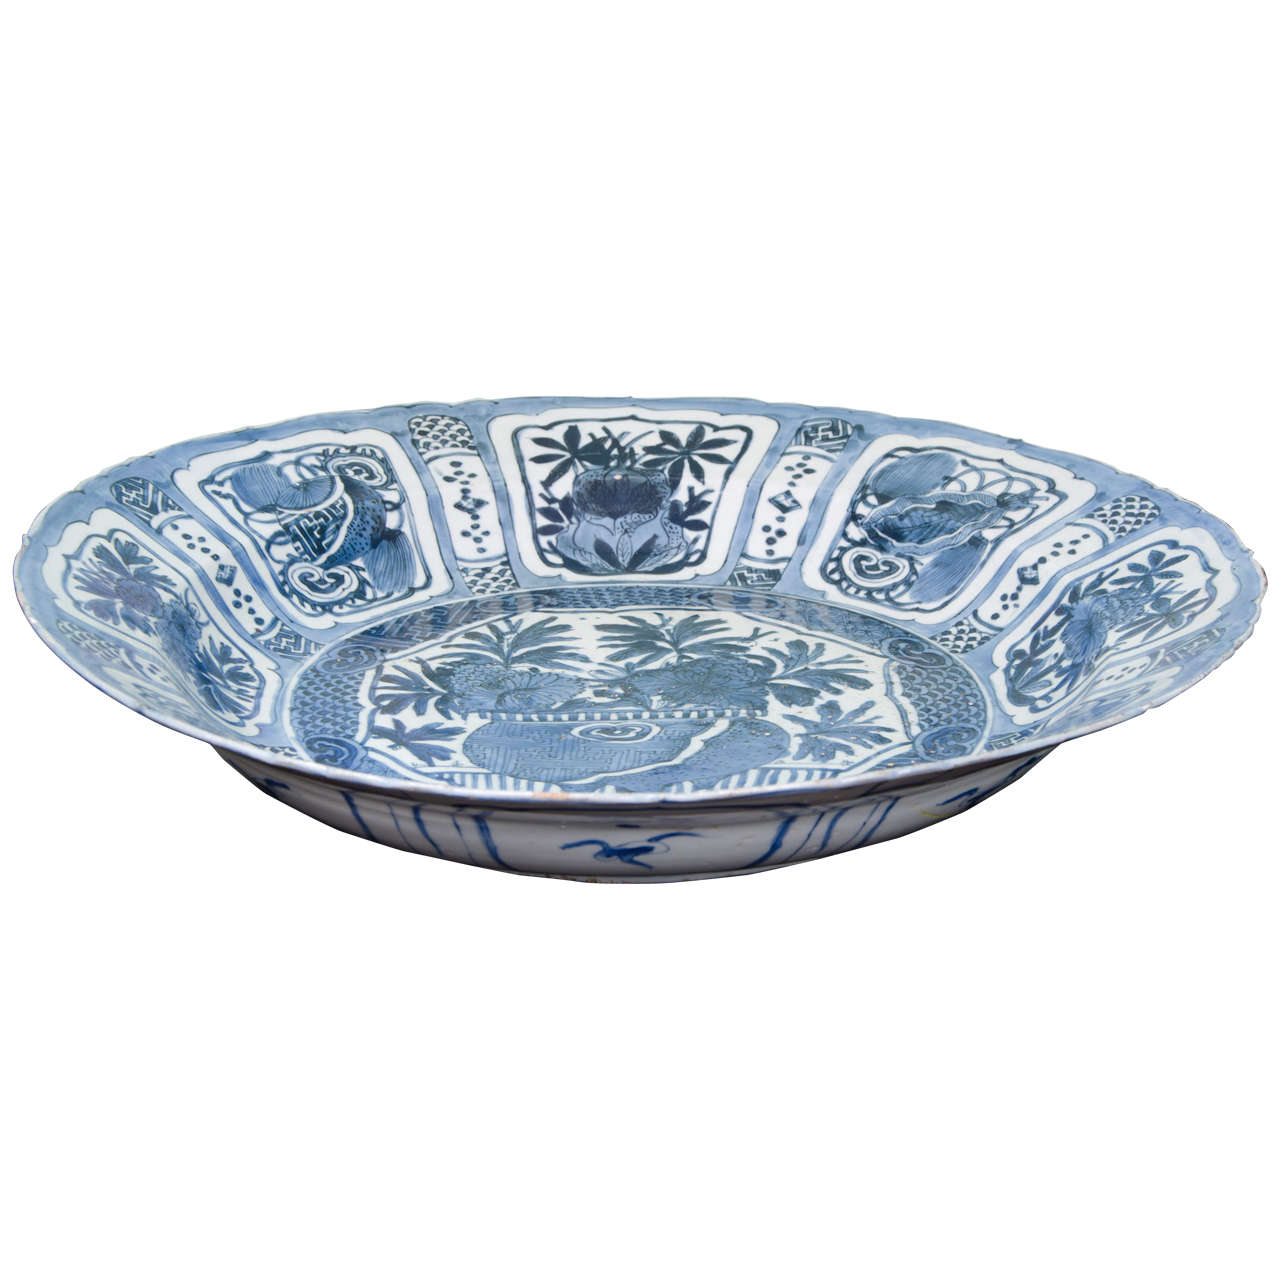 Large Chinese Blue and White Kraak Charger, Wanli